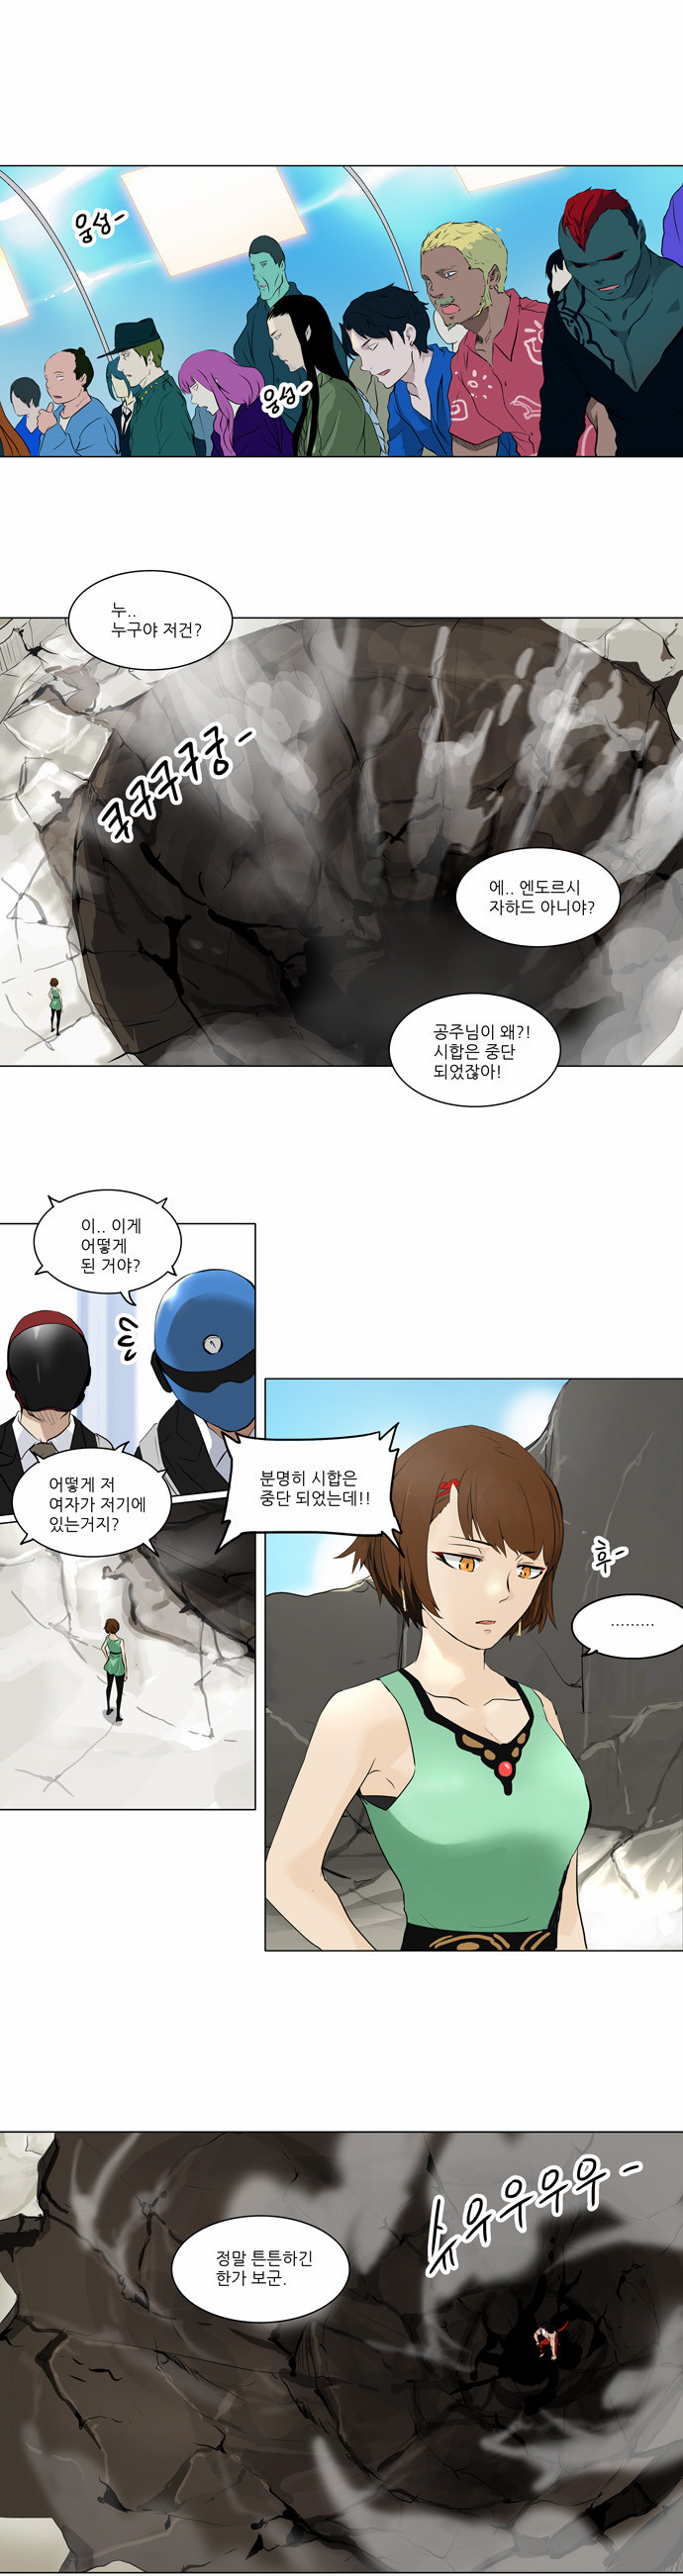 Tower of God - Chapter 187 - Page 1